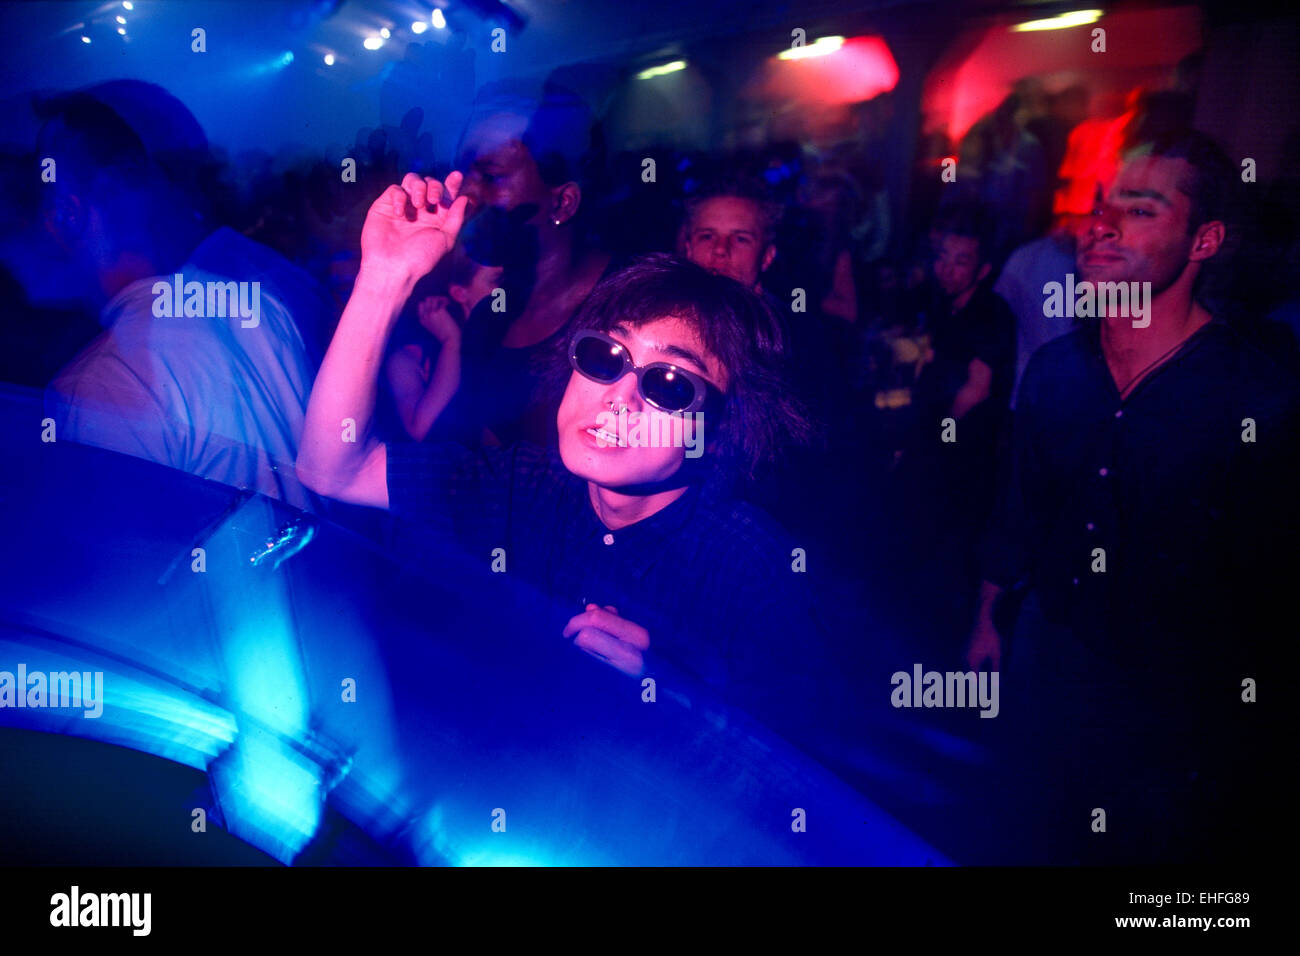 Japanese guy dancing at The End nightclub. Stock Photo